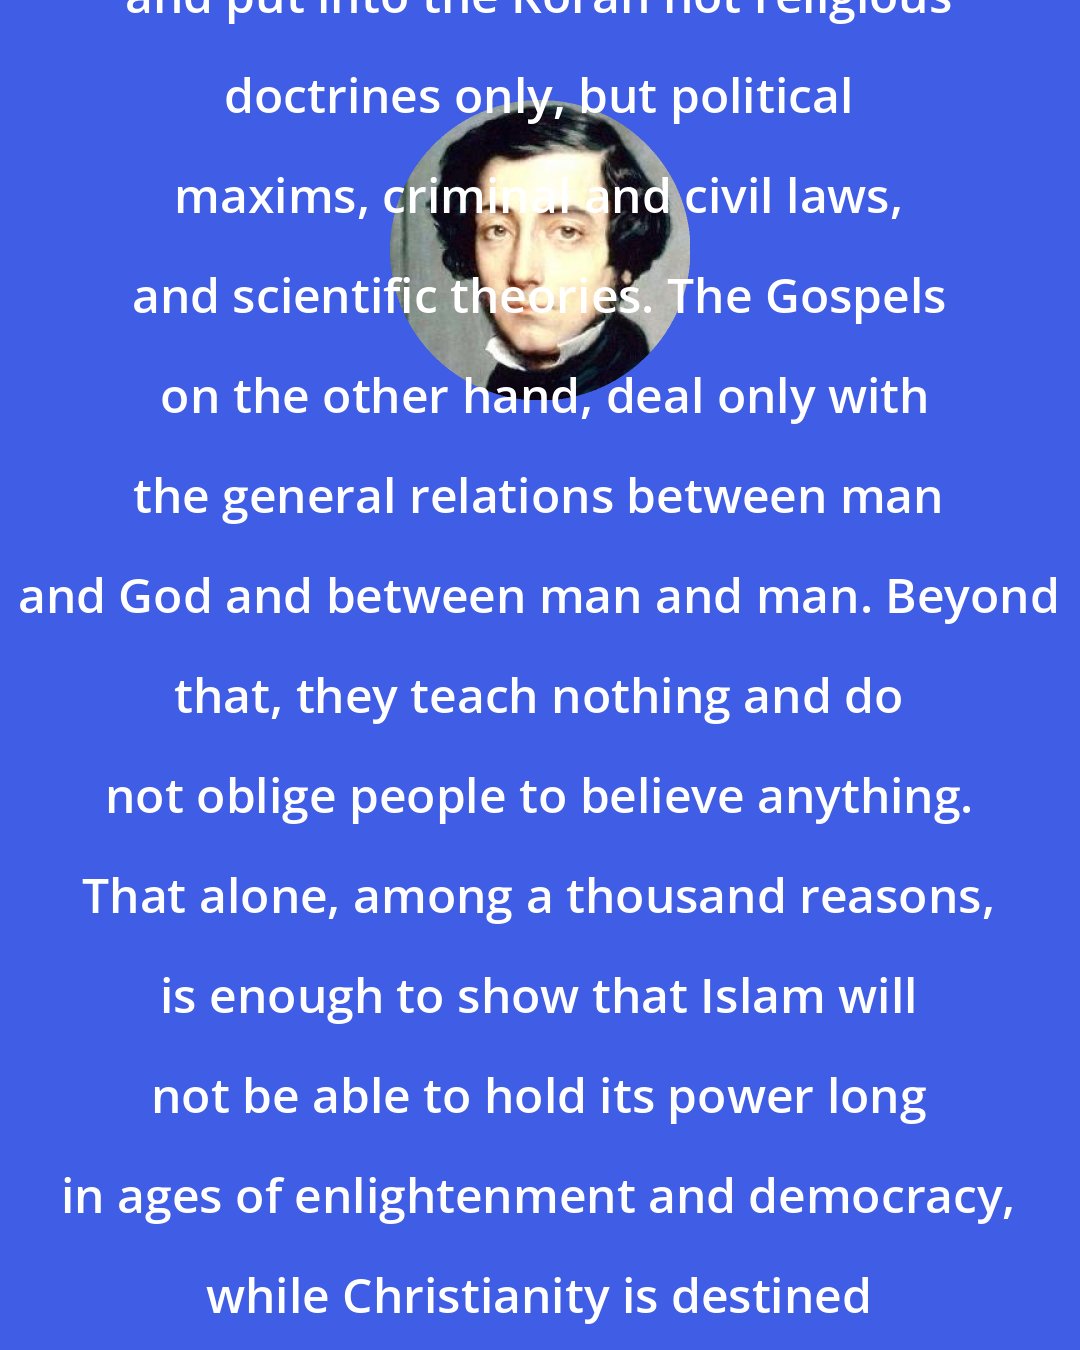 Alexis de Tocqueville: Muhammad brought down from heaven and put into the Koran not religious doctrines only, but political maxims, criminal and civil laws, and scientific theories. The Gospels  on the other hand, deal only with the general relations between man and God and between man and man. Beyond that, they teach nothing and do not oblige people to believe anything. That alone, among a thousand reasons, is enough to show that Islam will not be able to hold its power long in ages of enlightenment and democracy, while Christianity is destined to reign in such ages, as in all others.